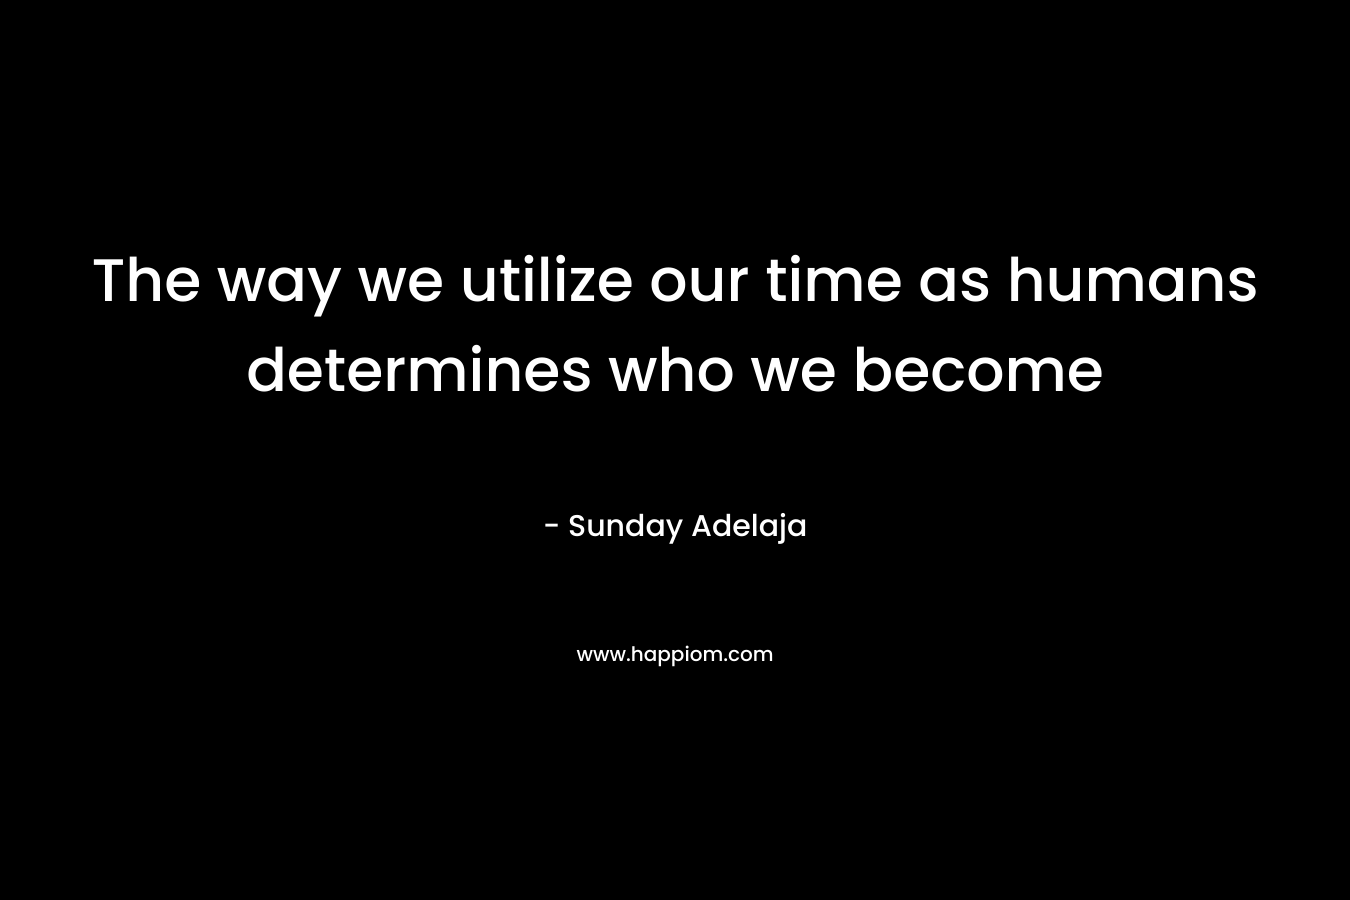 The way we utilize our time as humans determines who we become